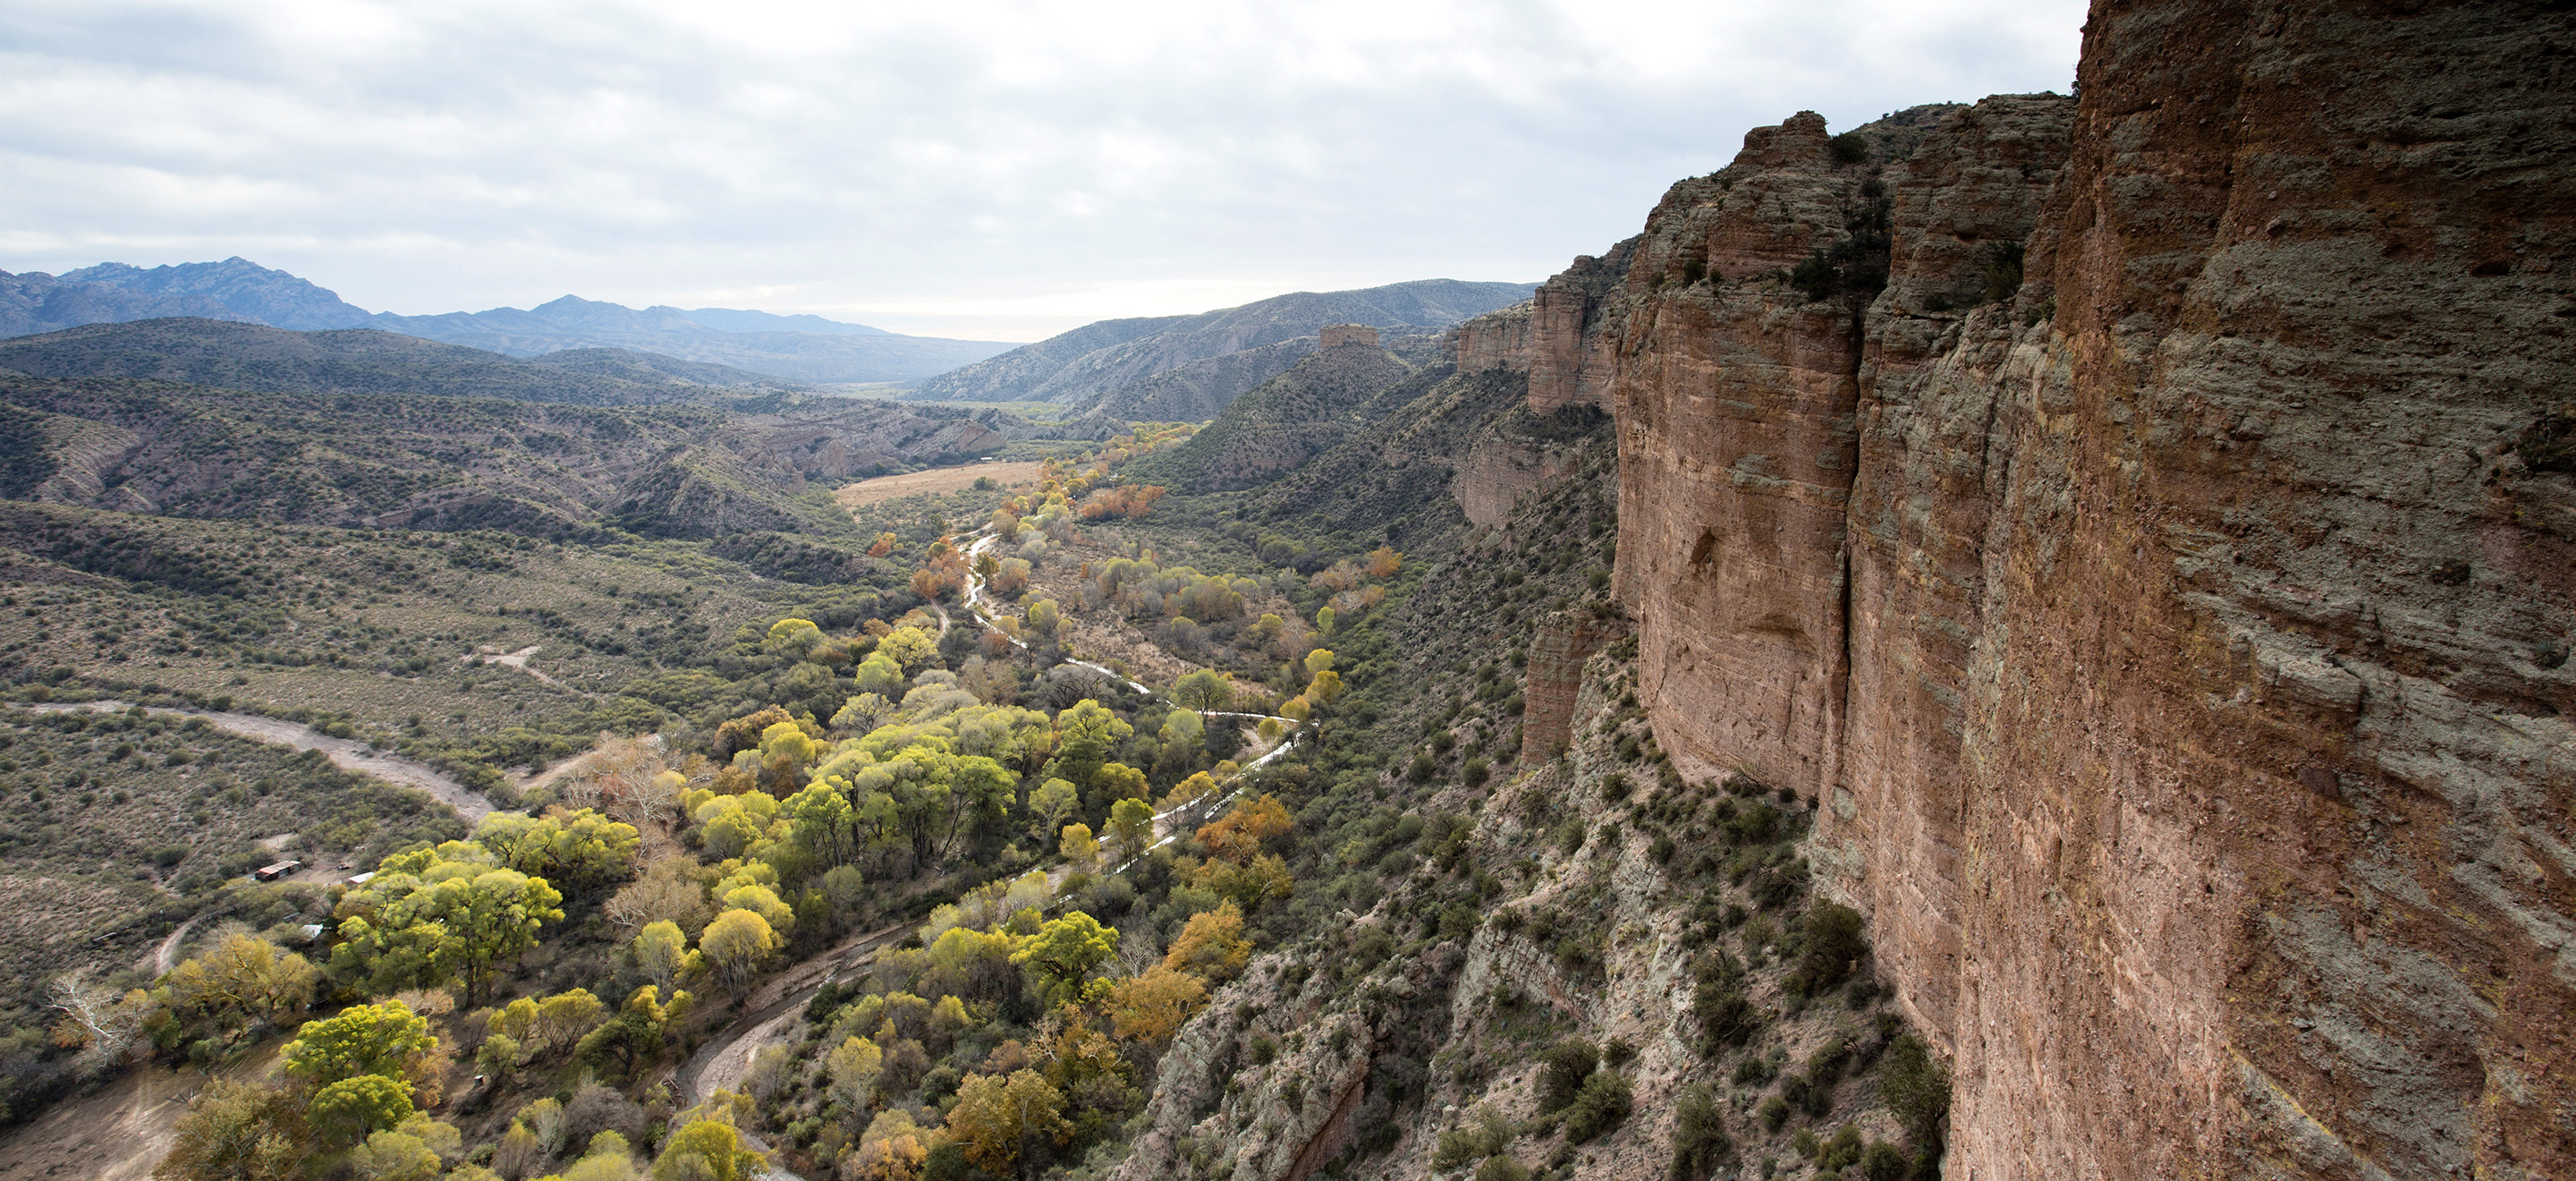 A landscape view of a valley, with steep red canyon wal